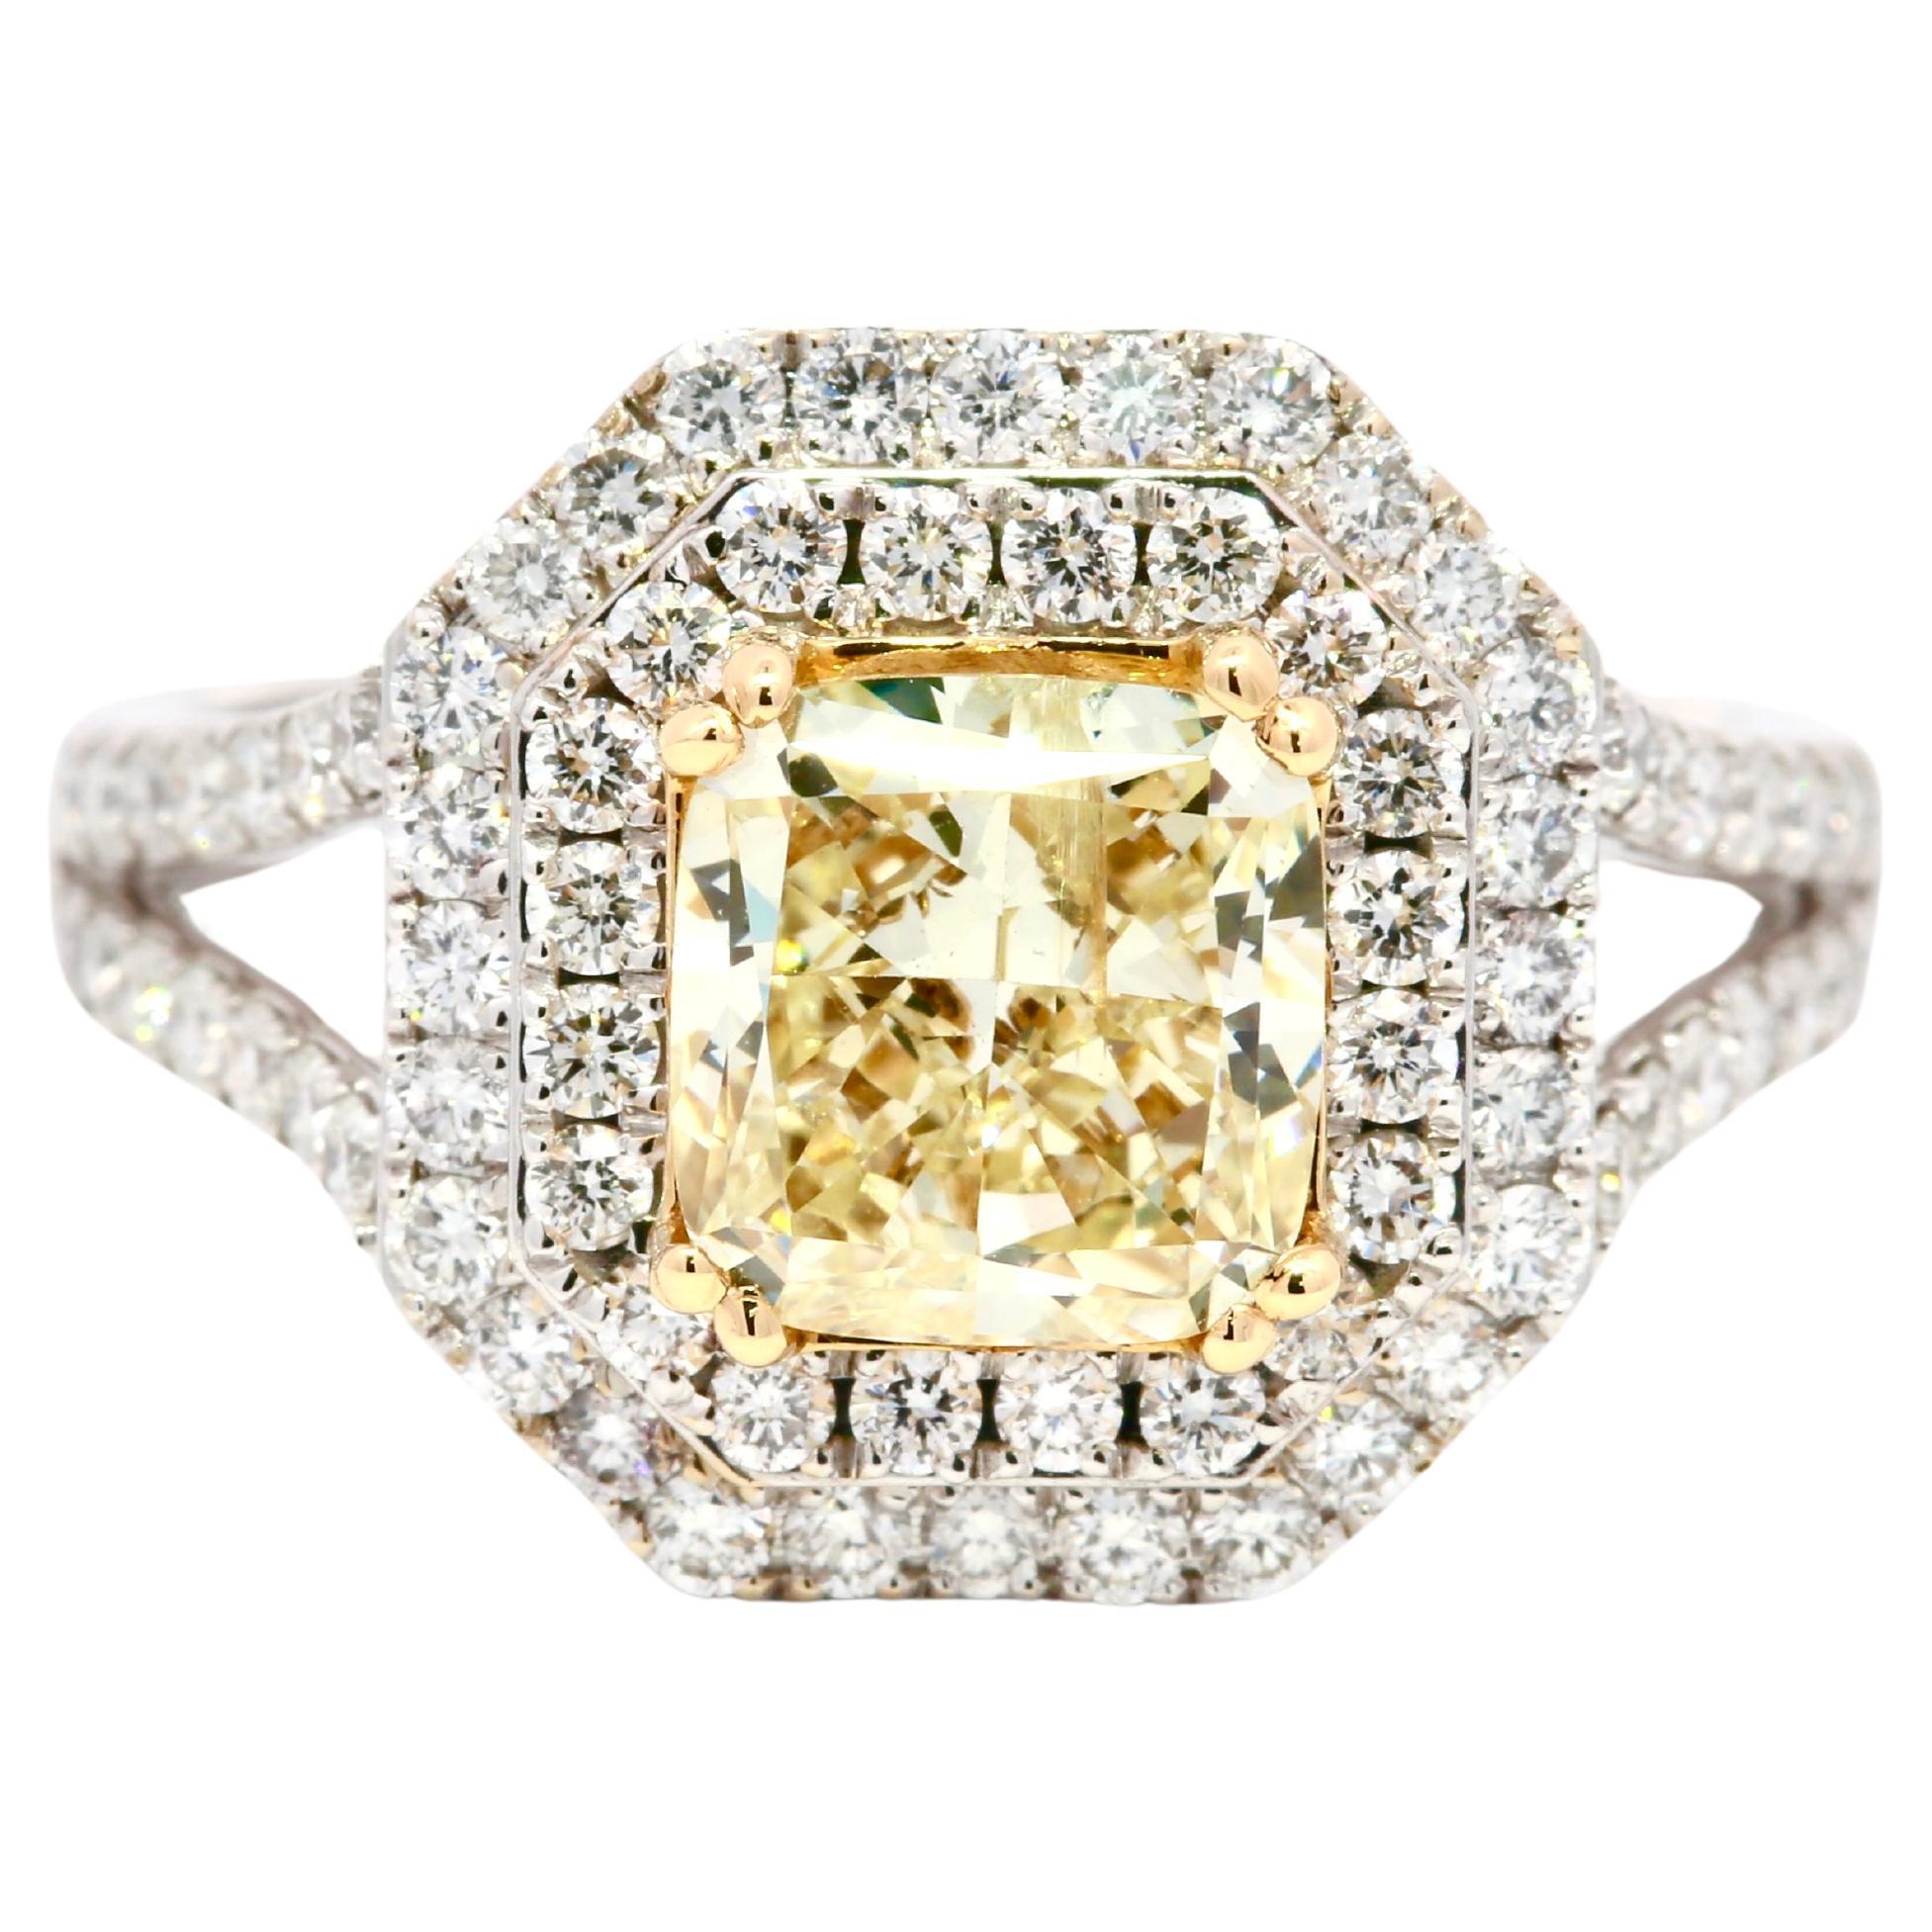 IGI Certified - 2.13 Carats Fancy Yellow Diamond Ring For Sale